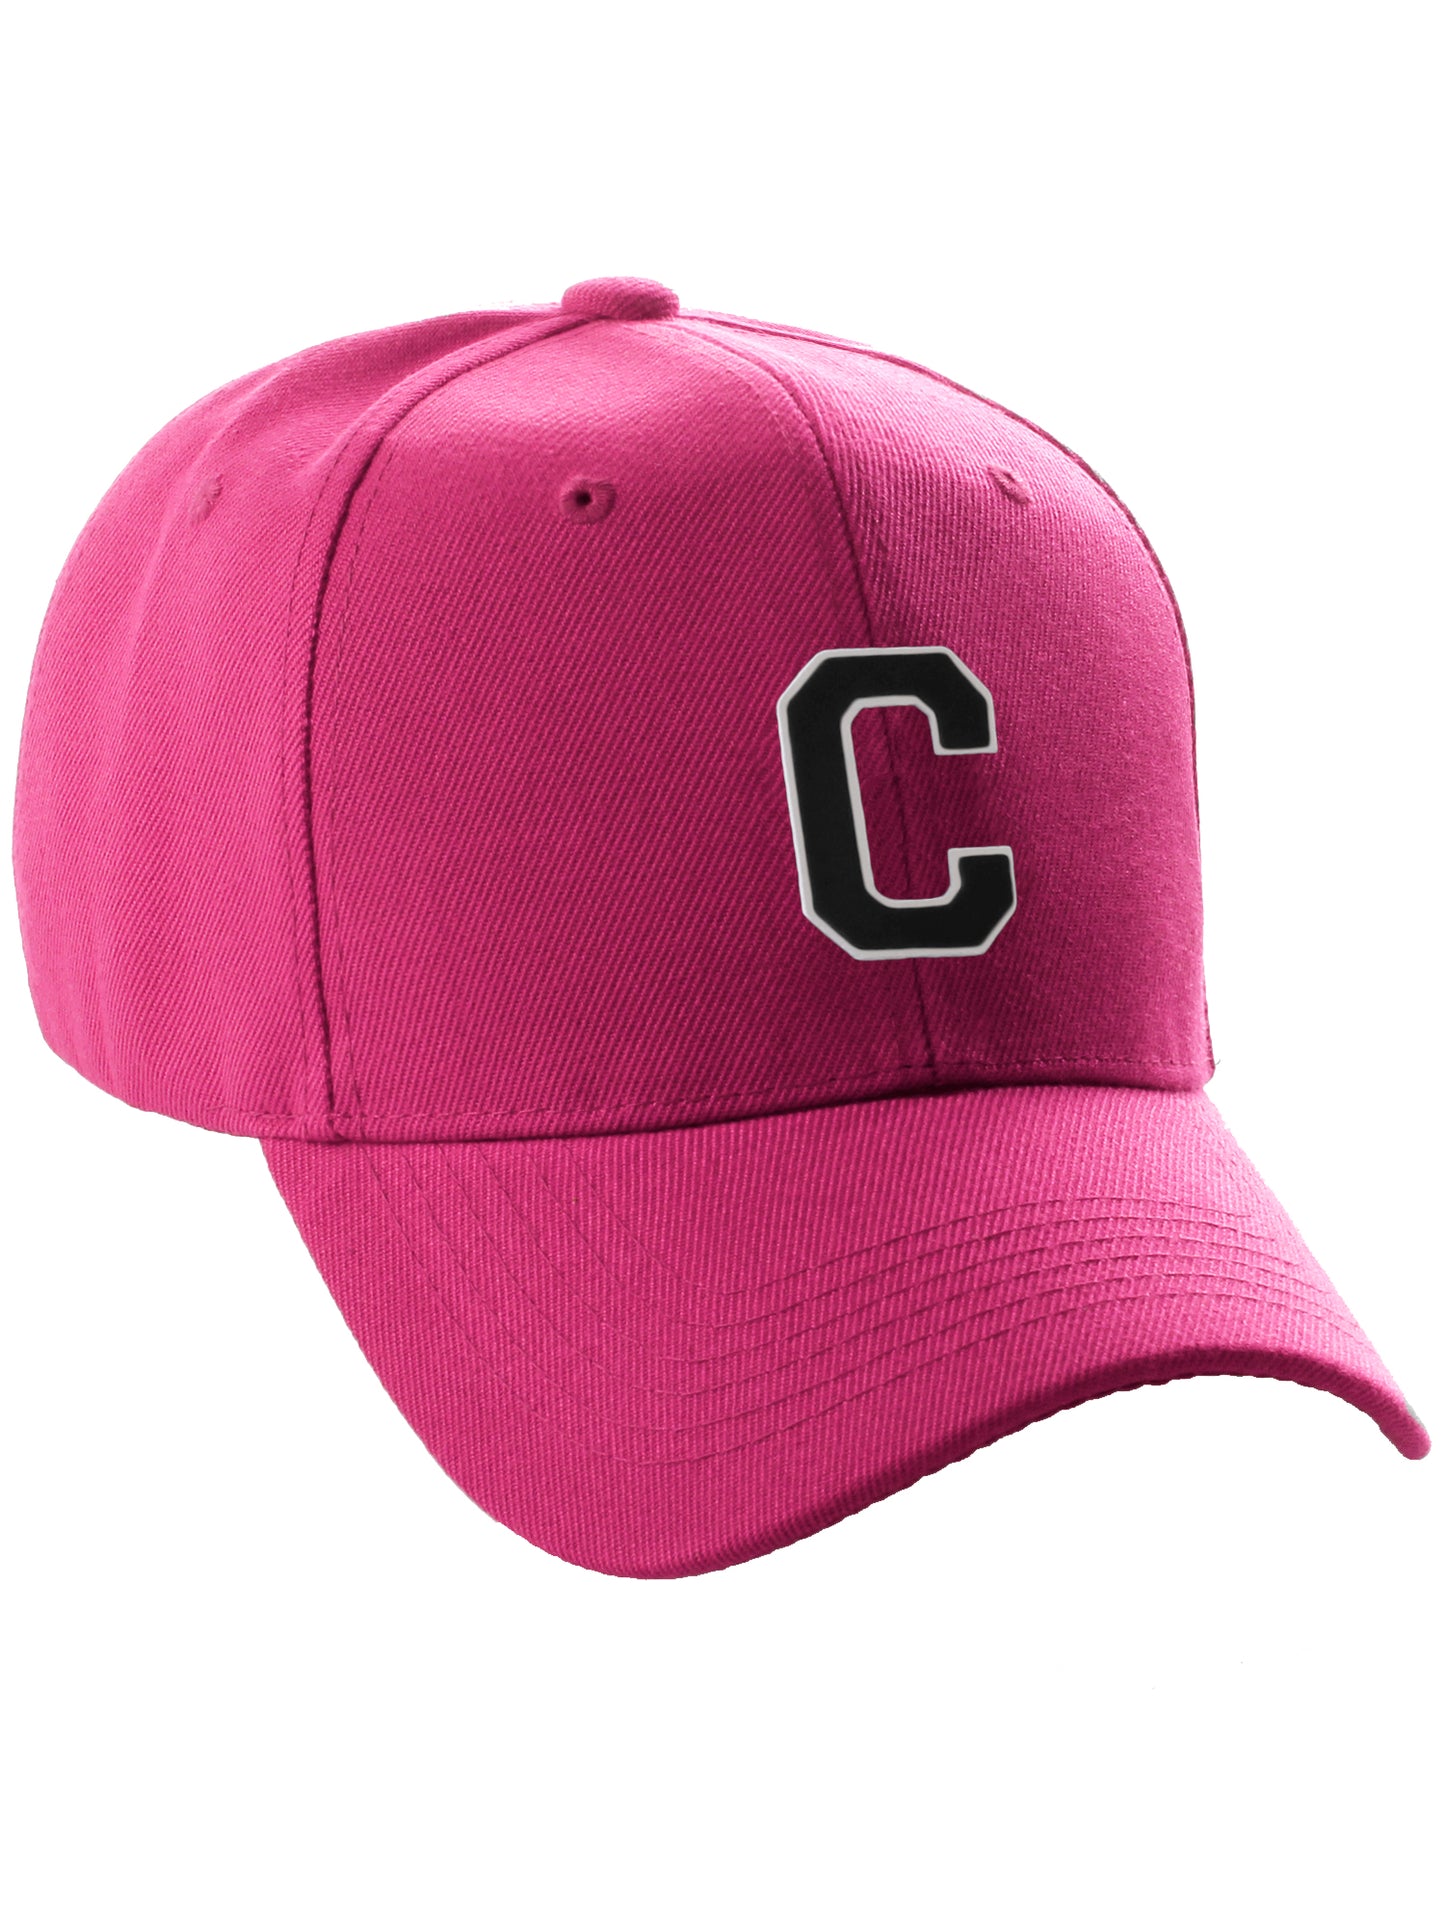 Classic Baseball Hat Custom A to Z Initial Team Letter, Hot Pink Cap White Black